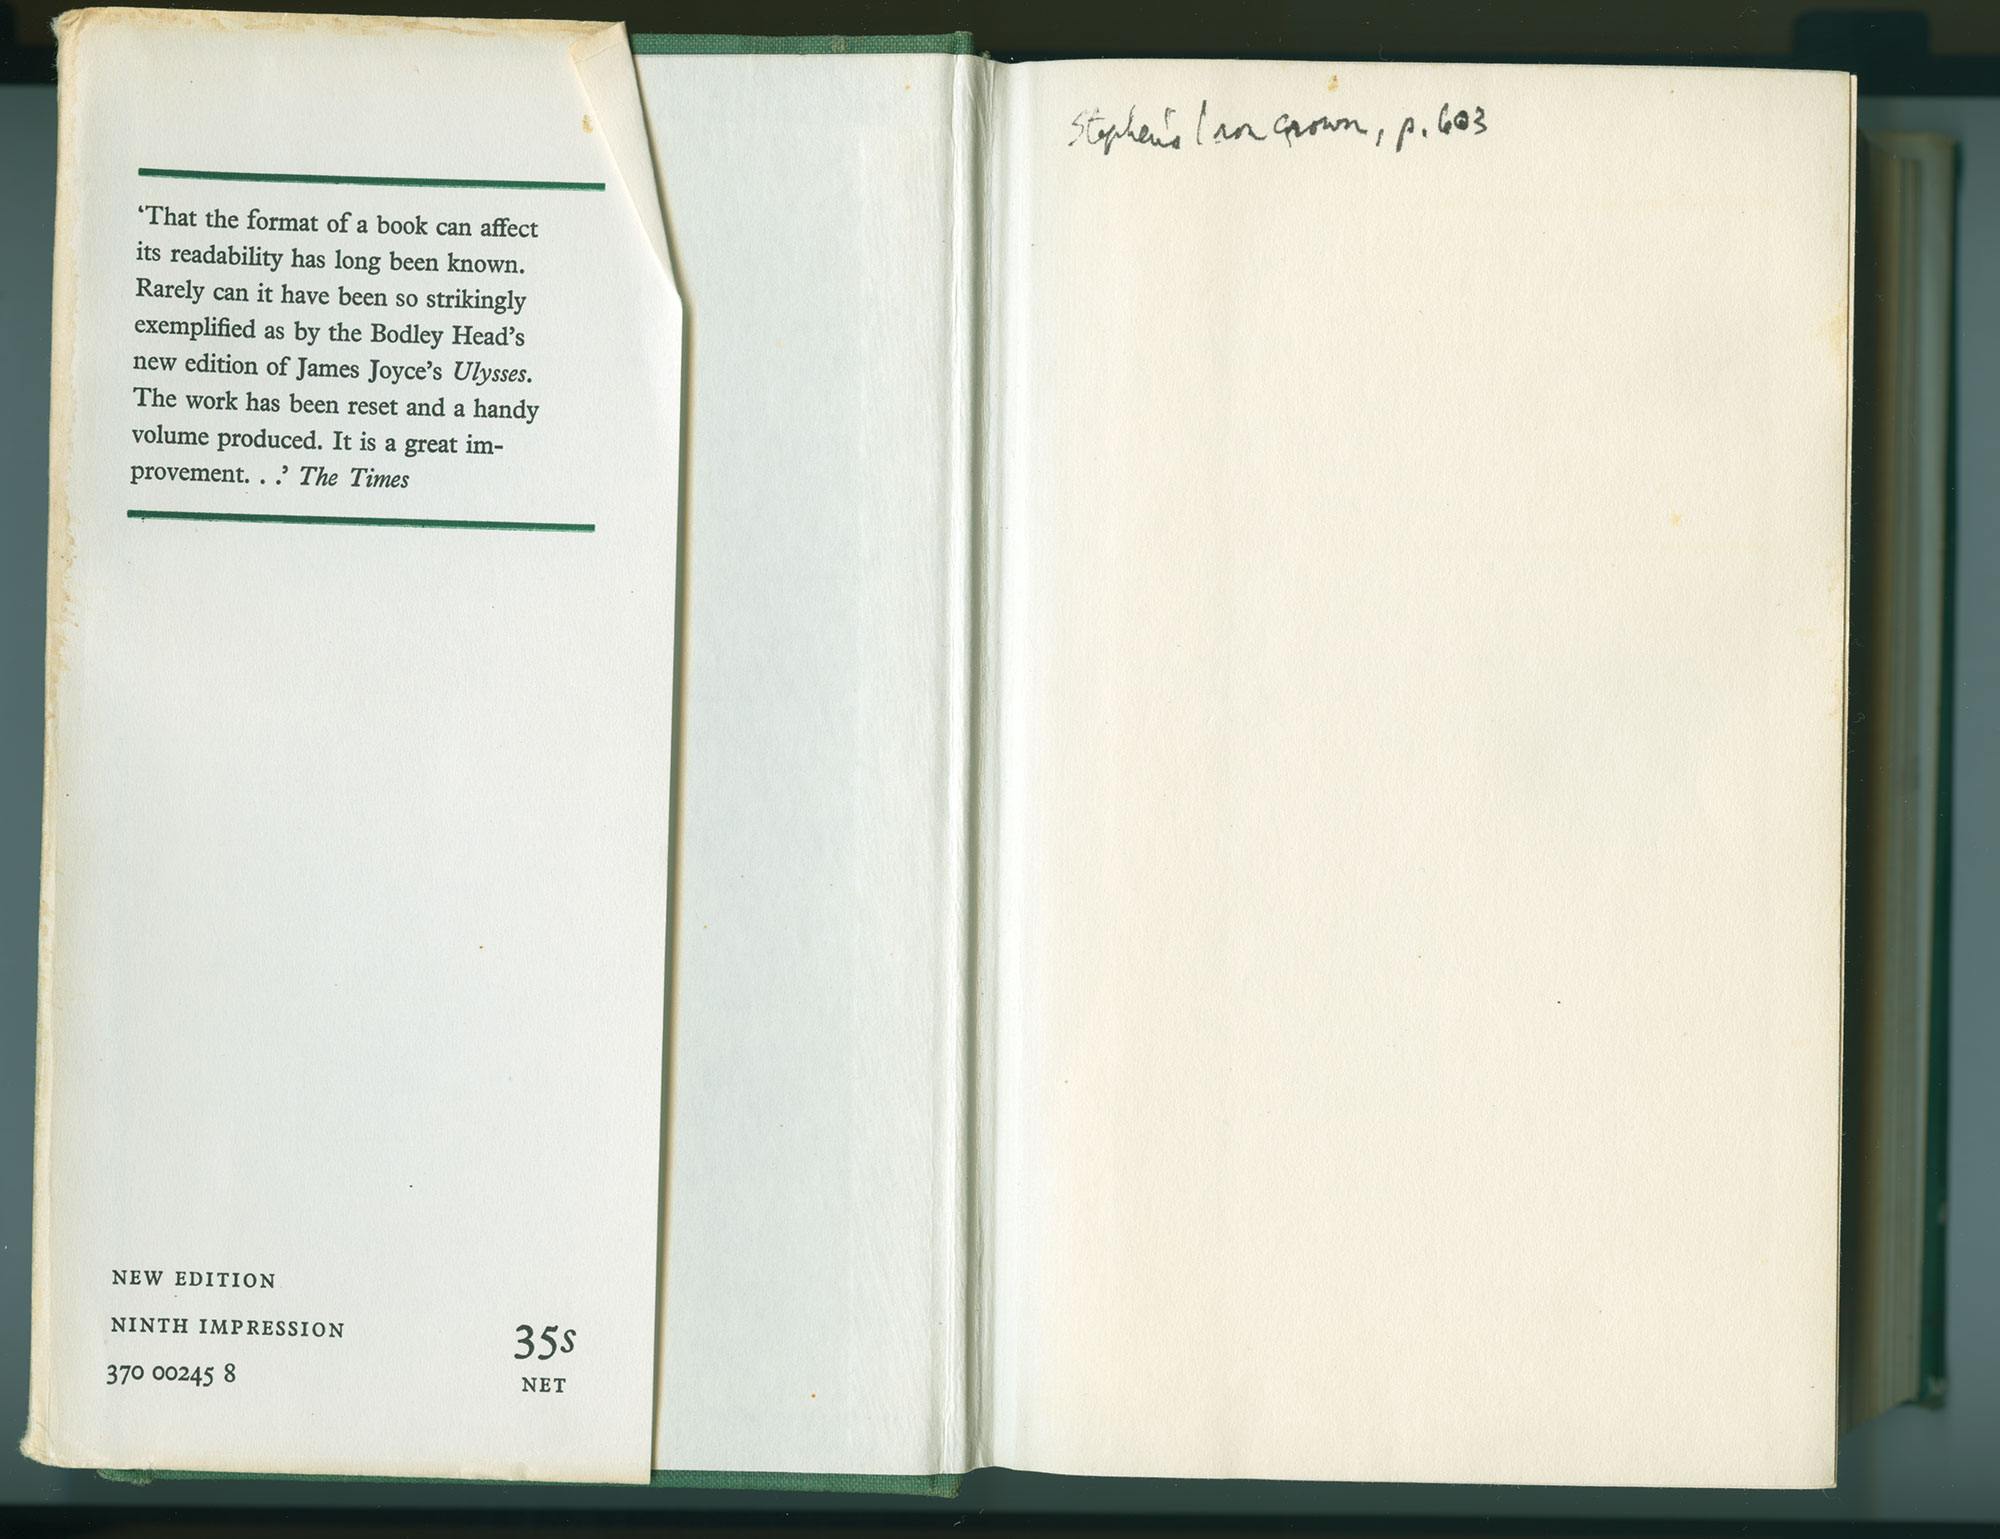 the interior cover of Ulysses with Stephen's iron crown, p. 603 written in